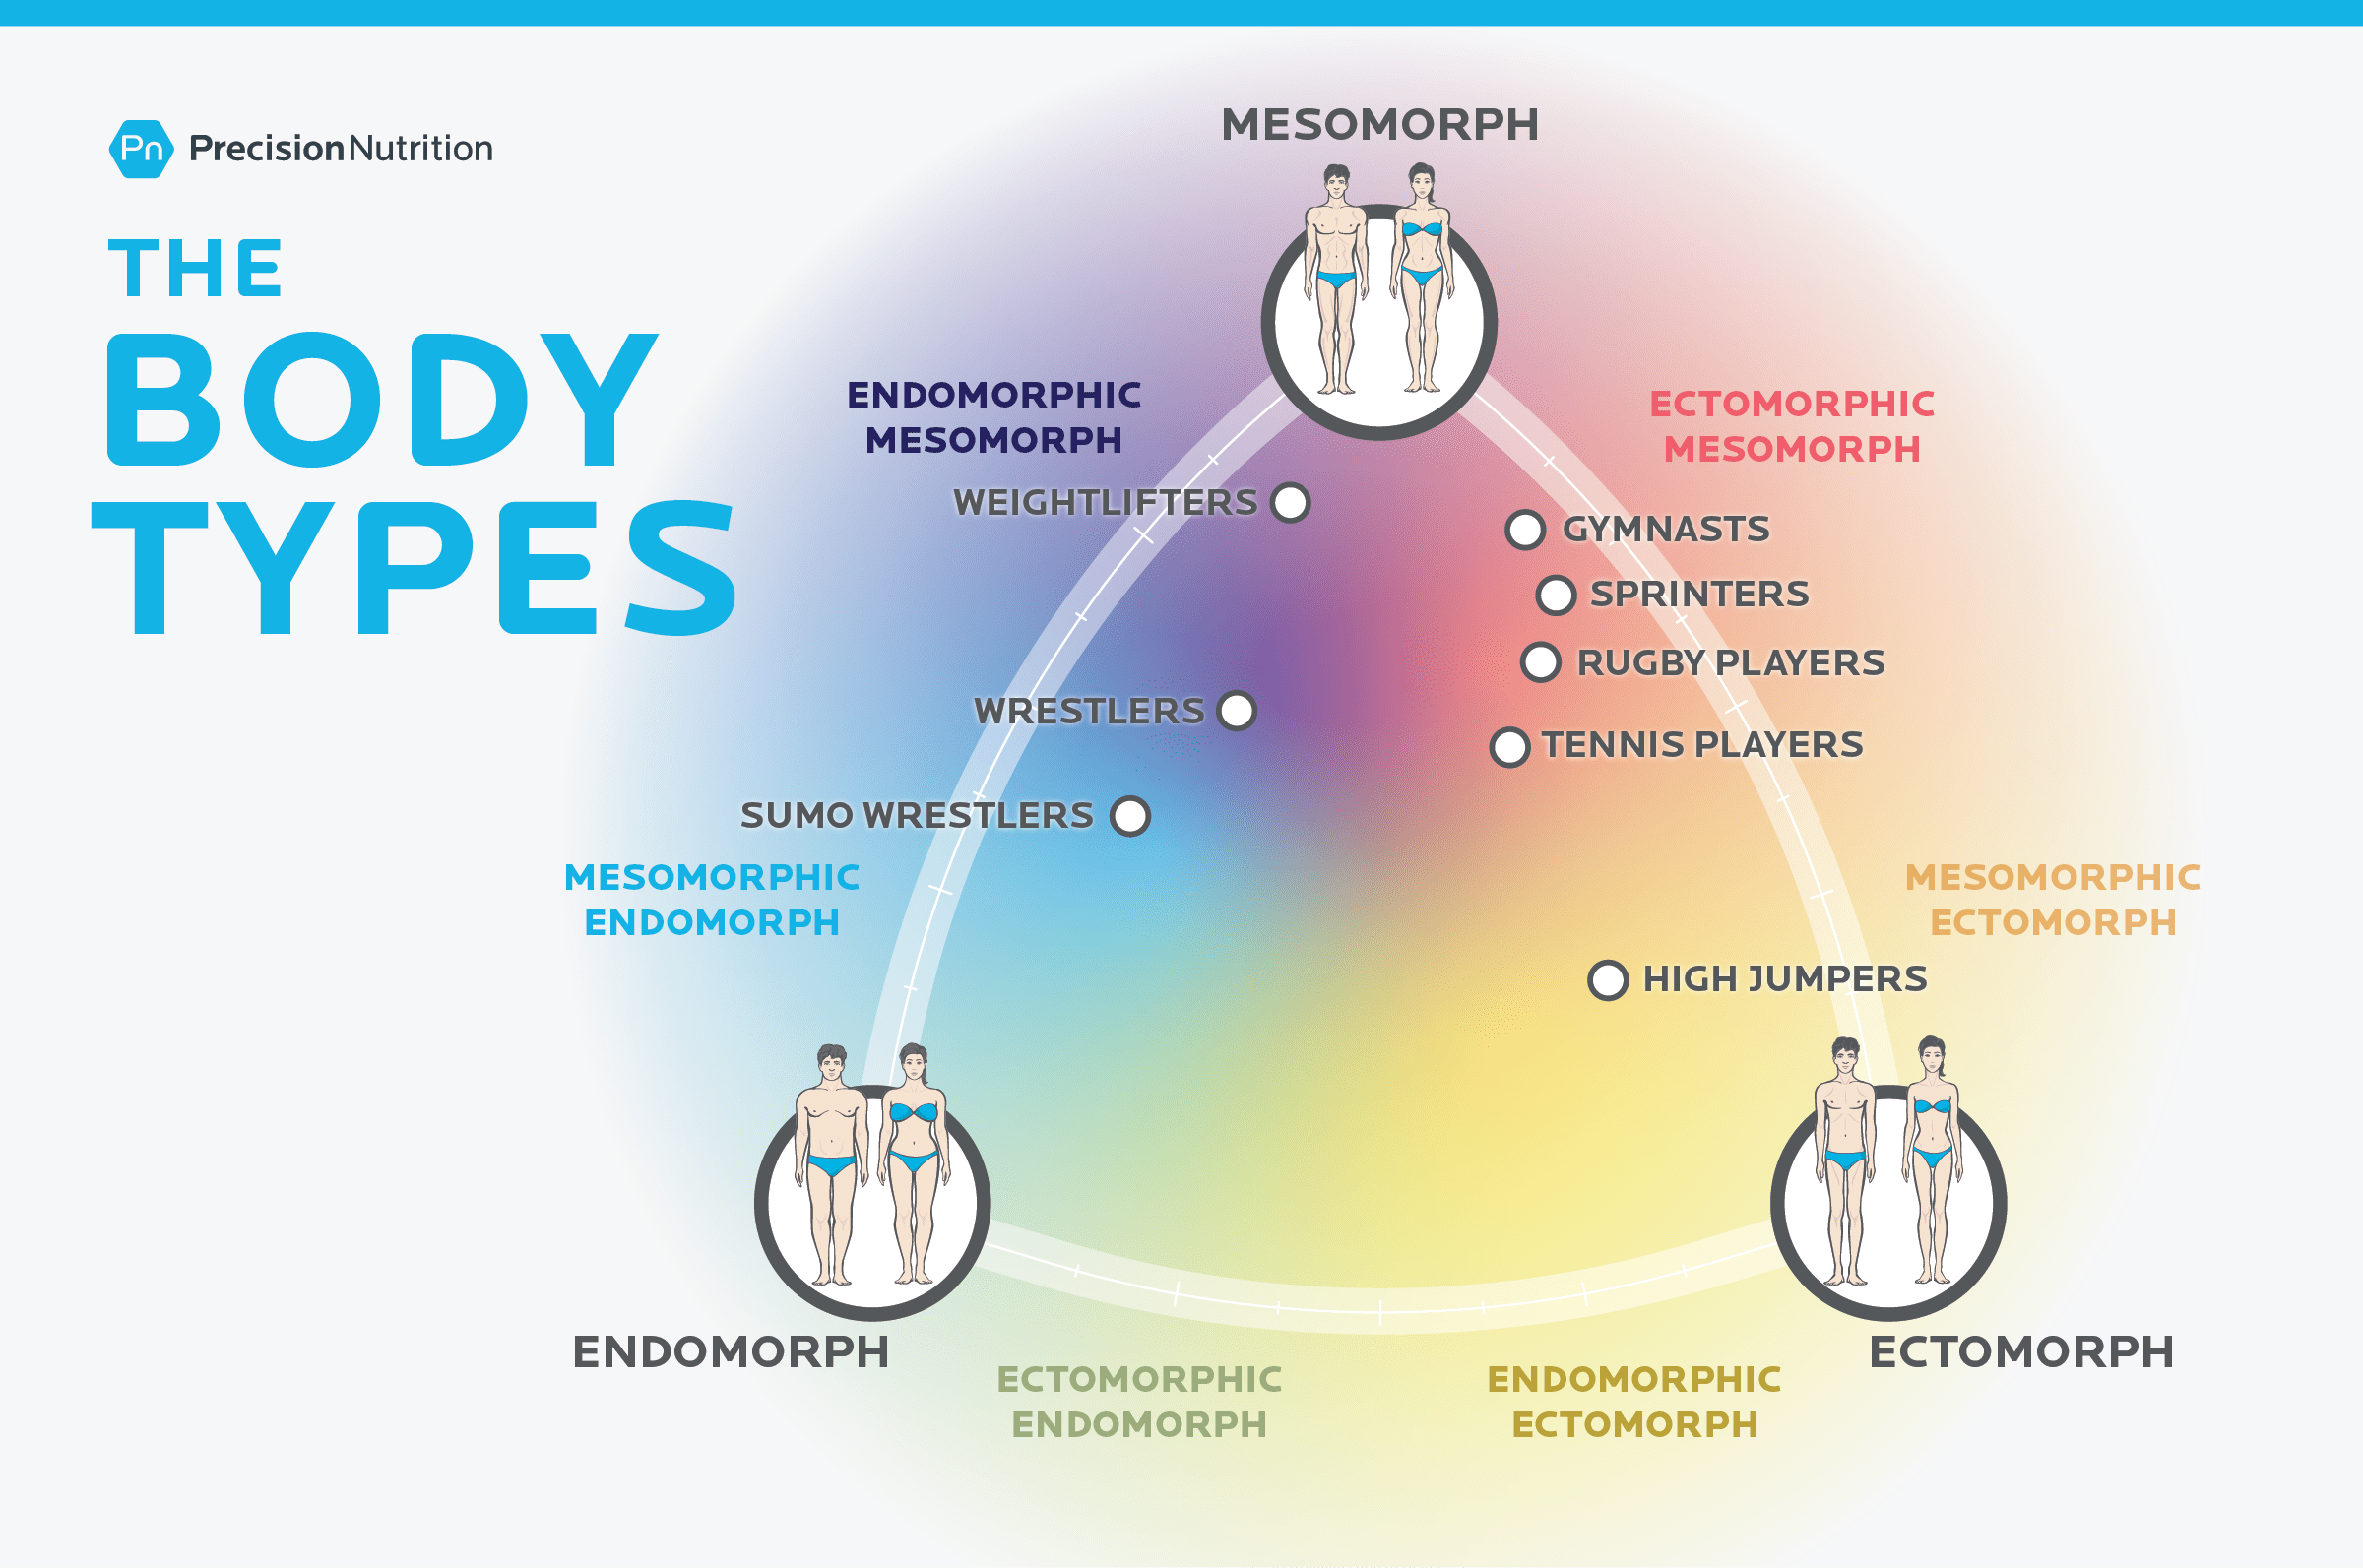 Infographic of the relationship between the three body types mesomorph, endomorph and ectomorph